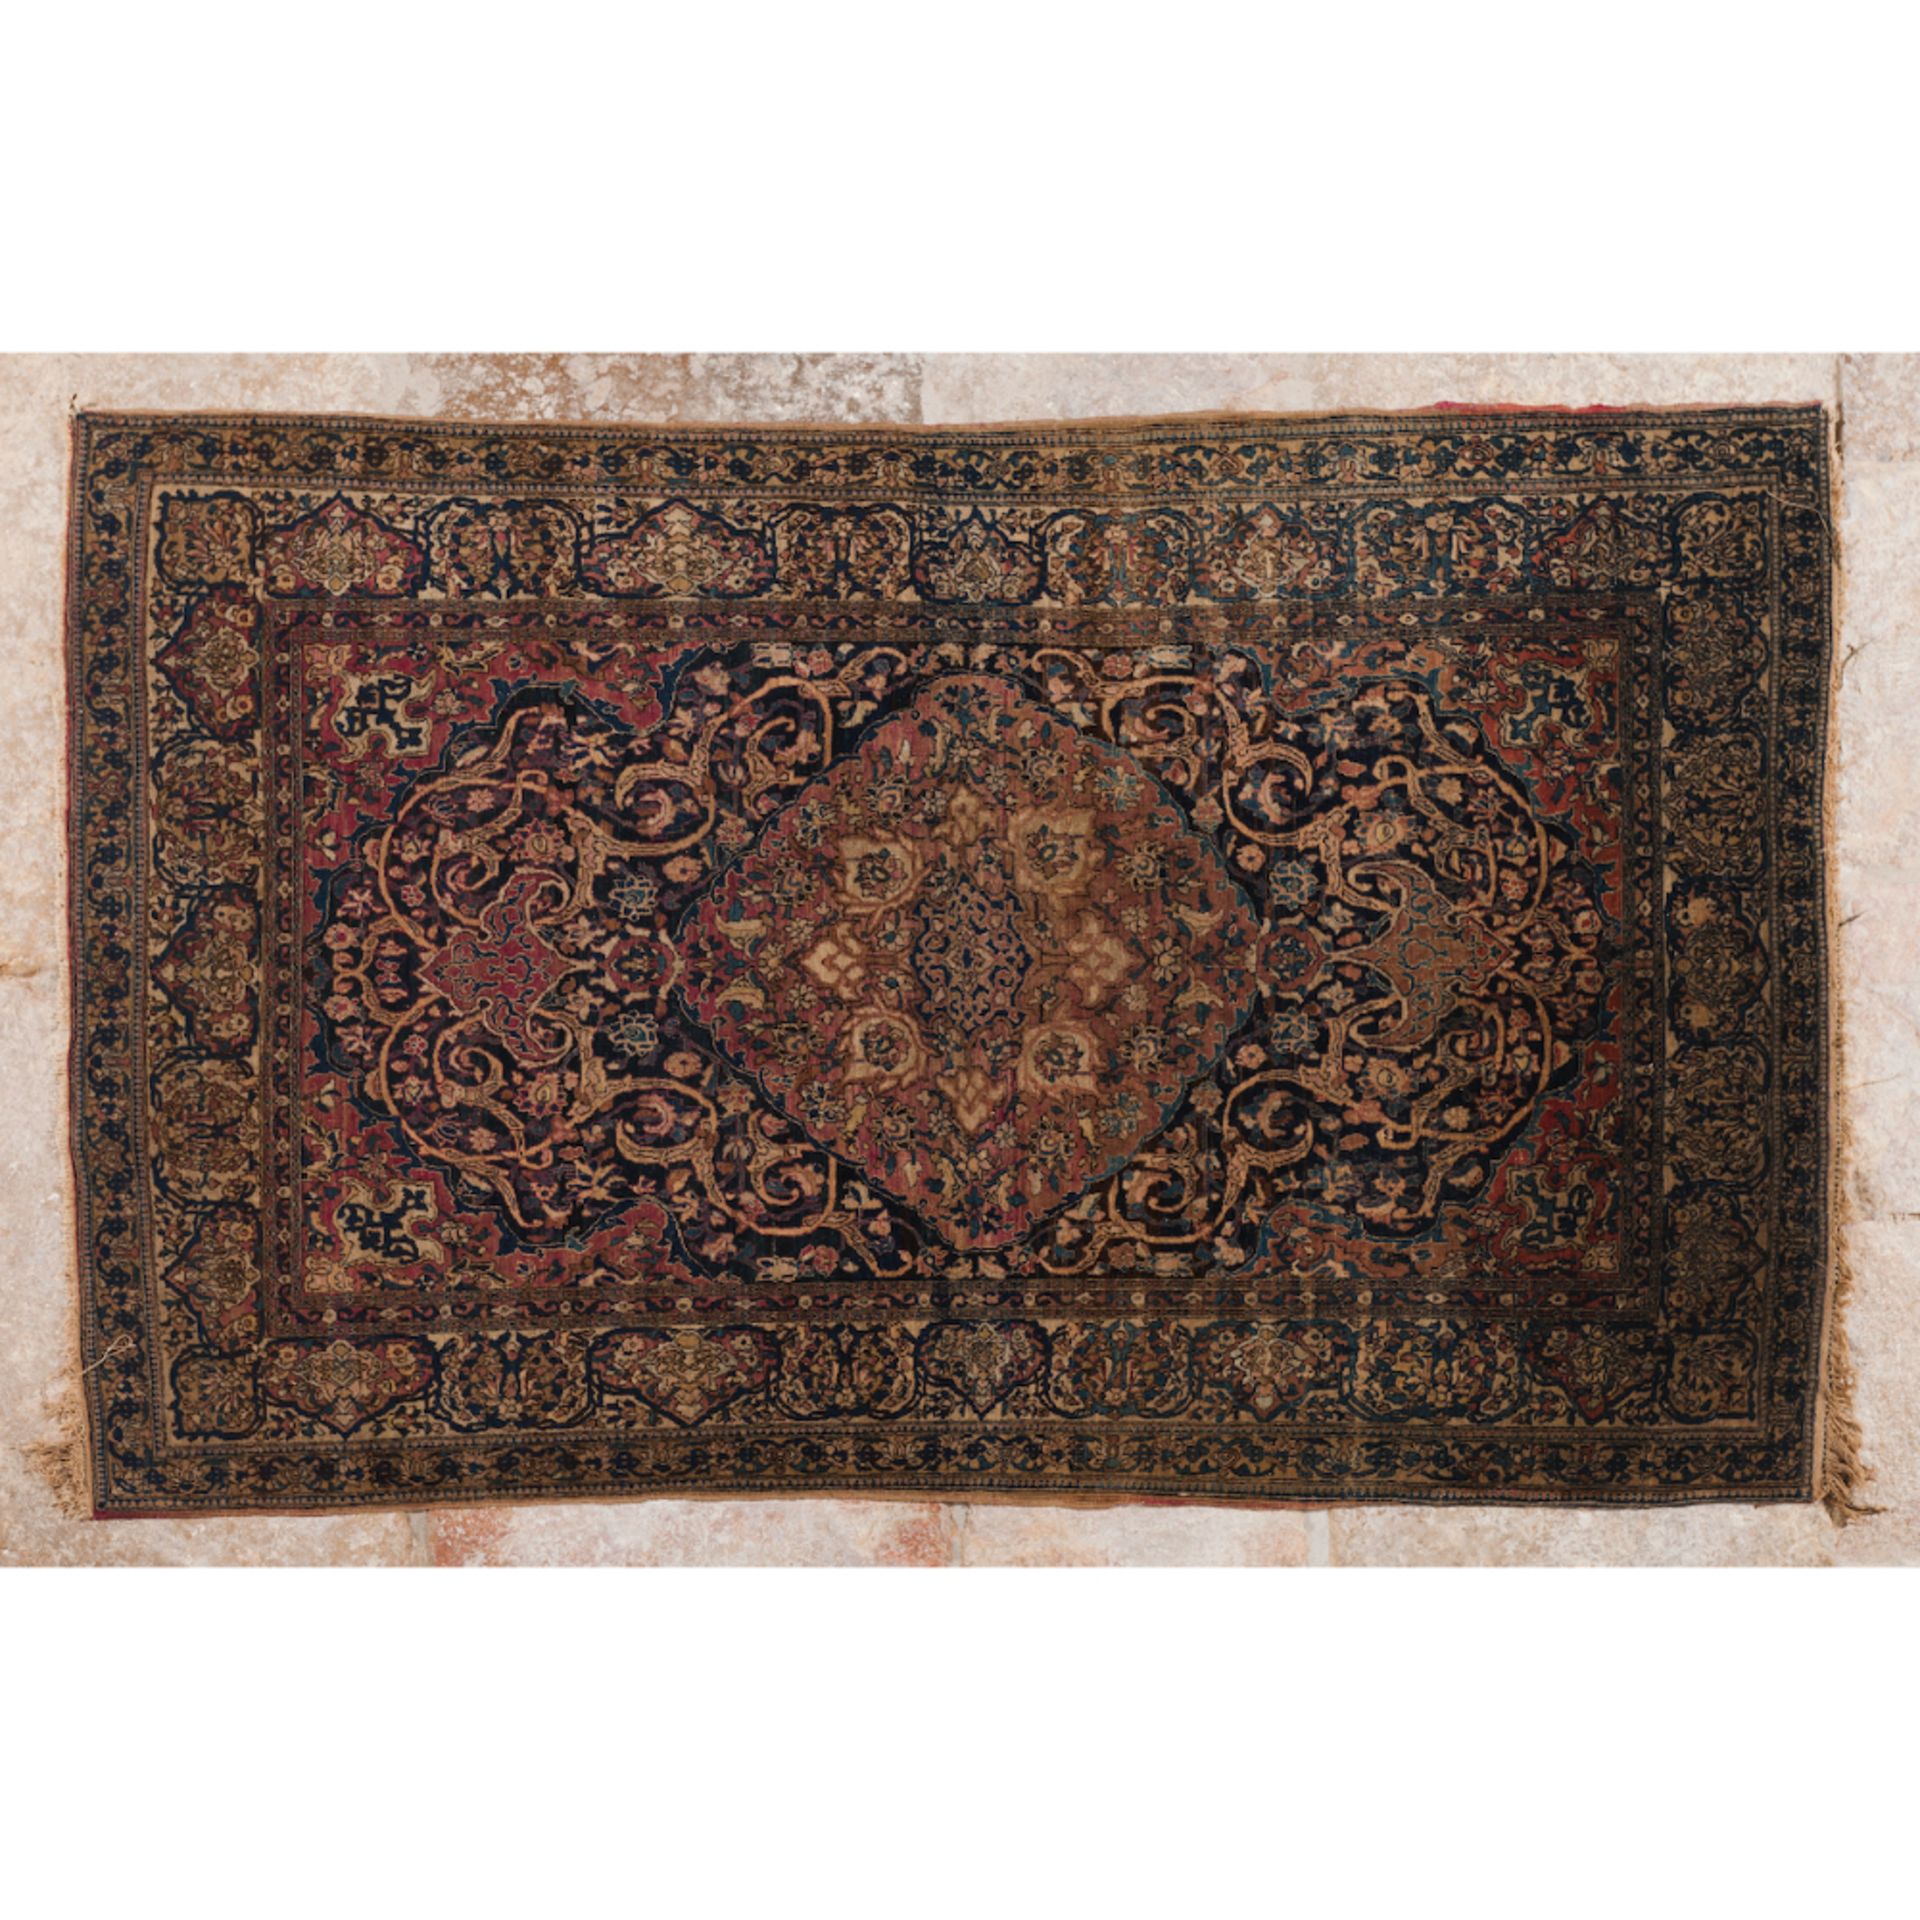 Arak rug, IrãoIn wool and cotton Floral design in shades of beige and burgundy218x140 cm